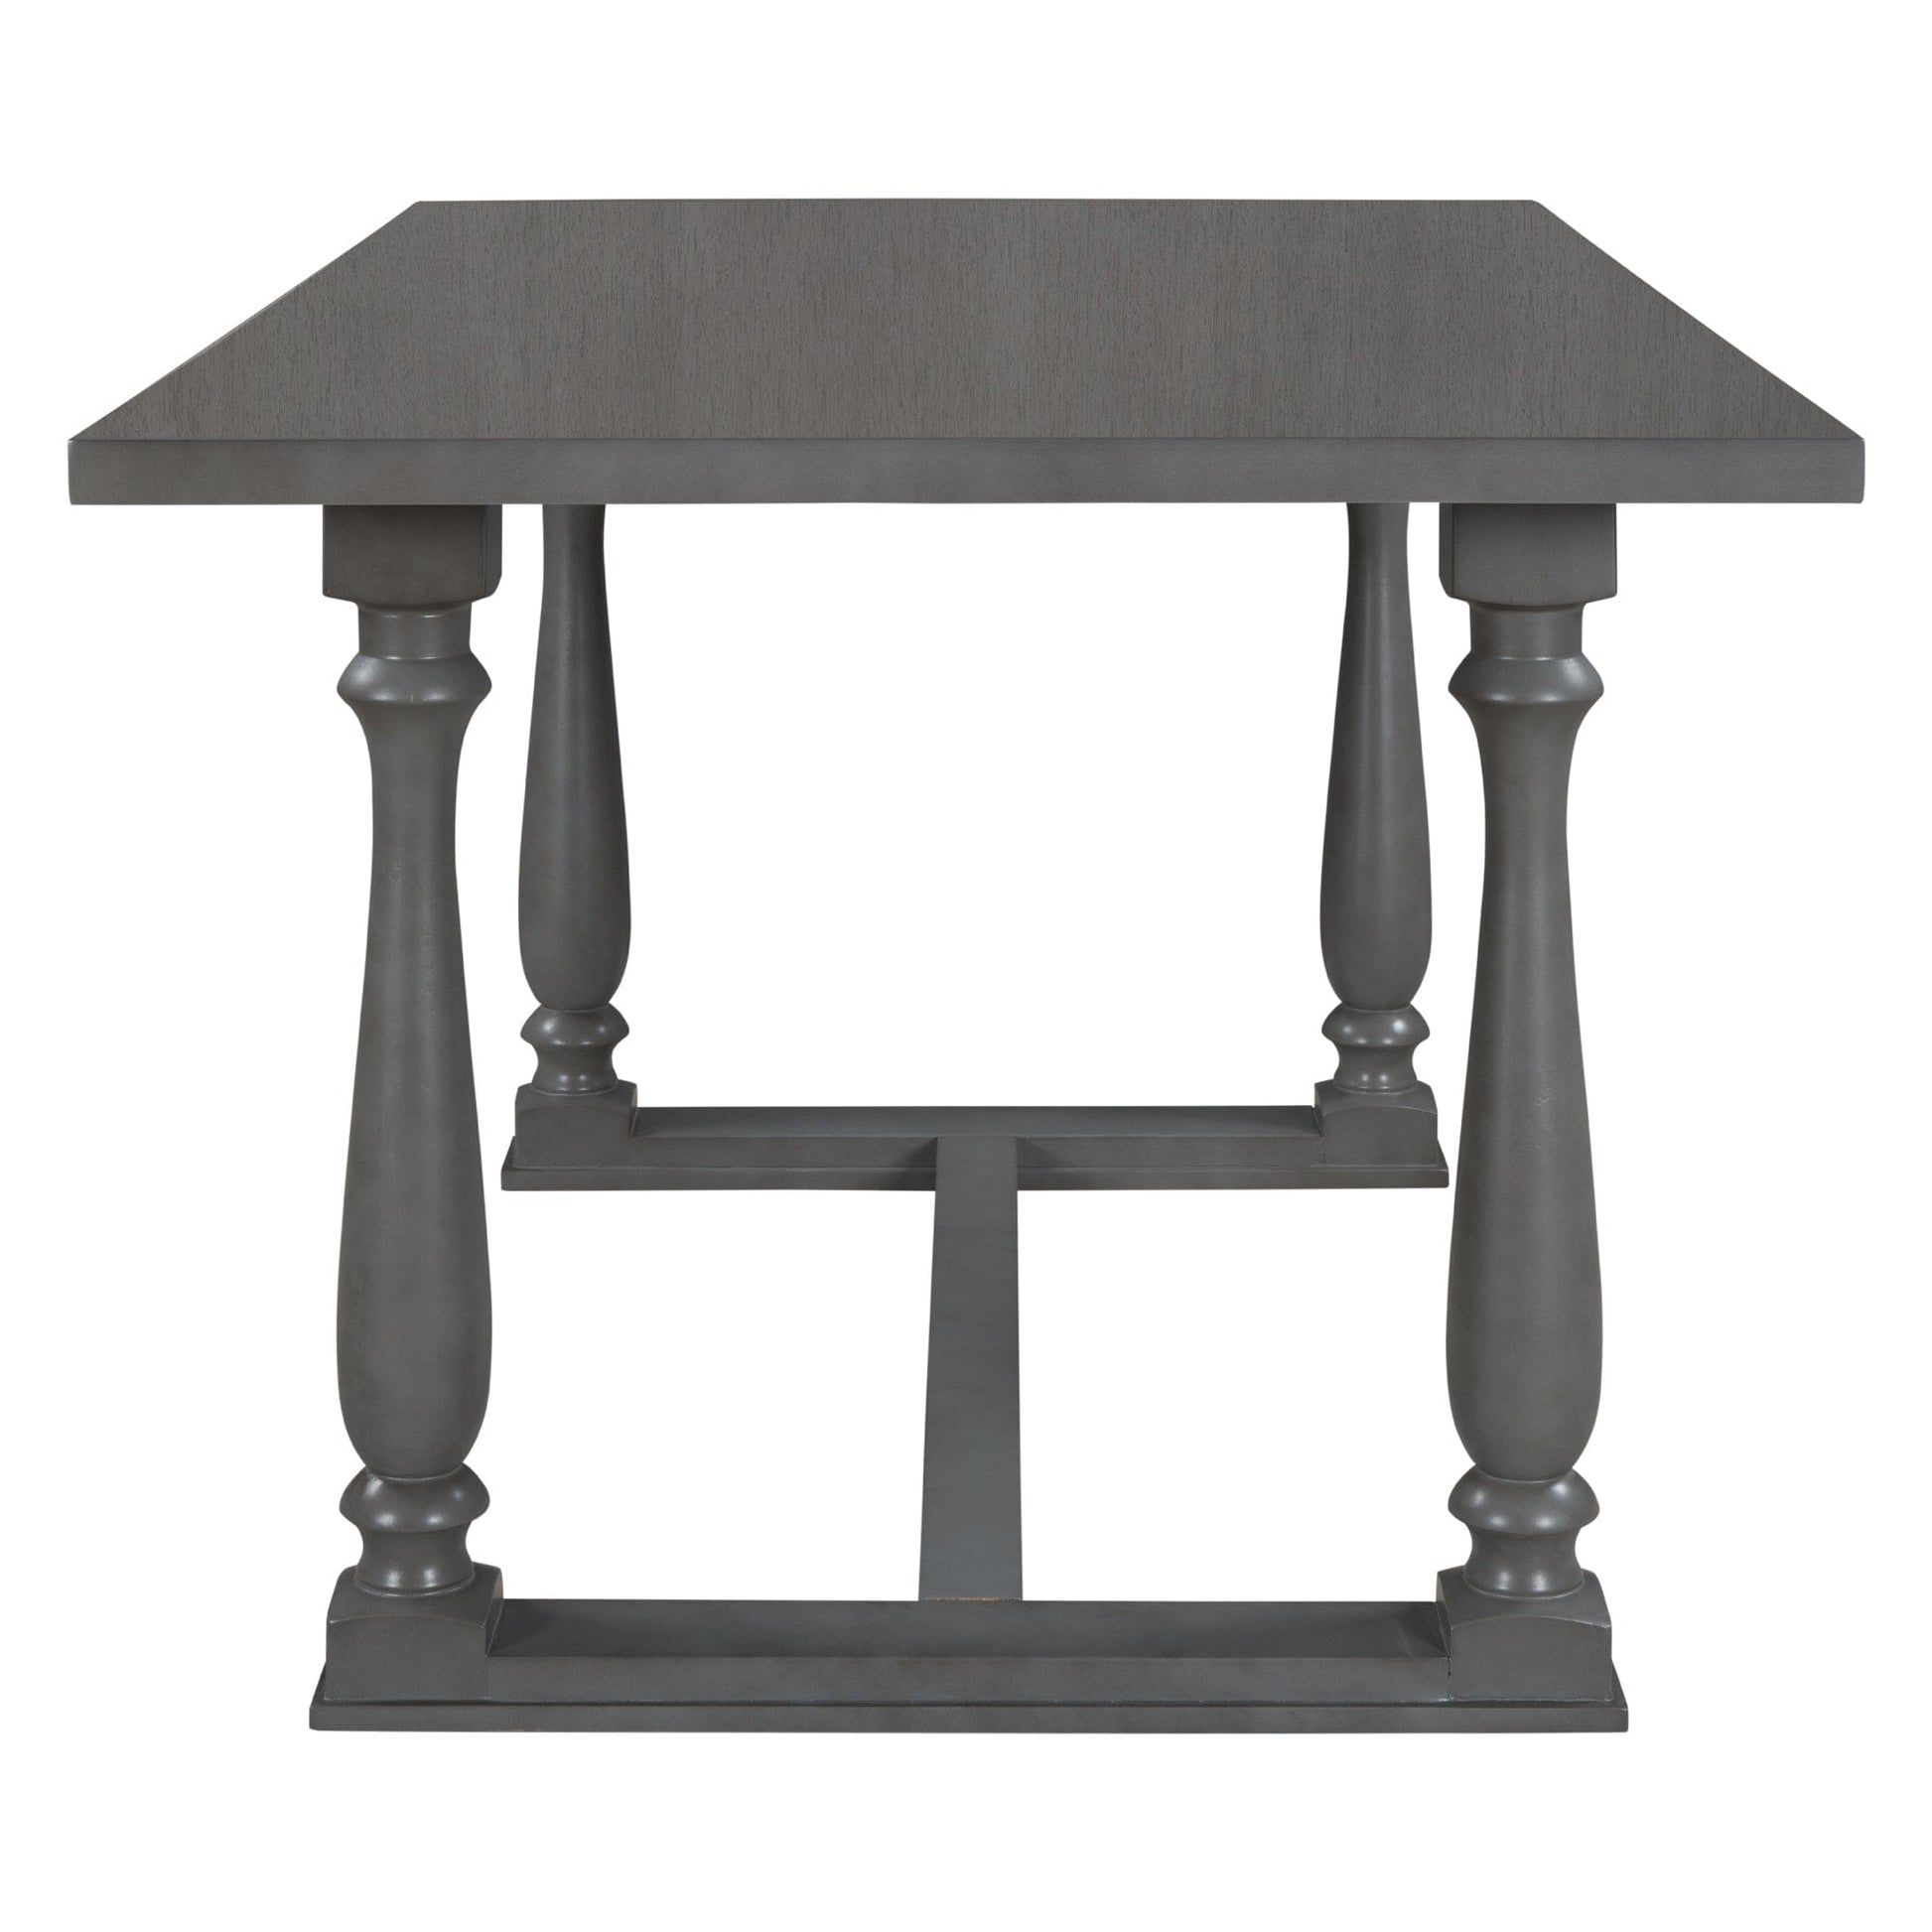 1st Choice Furniture Direct Dining Sets 1st Choice Gray 6-Piece Dining Set with Table & Foam-covered Backs